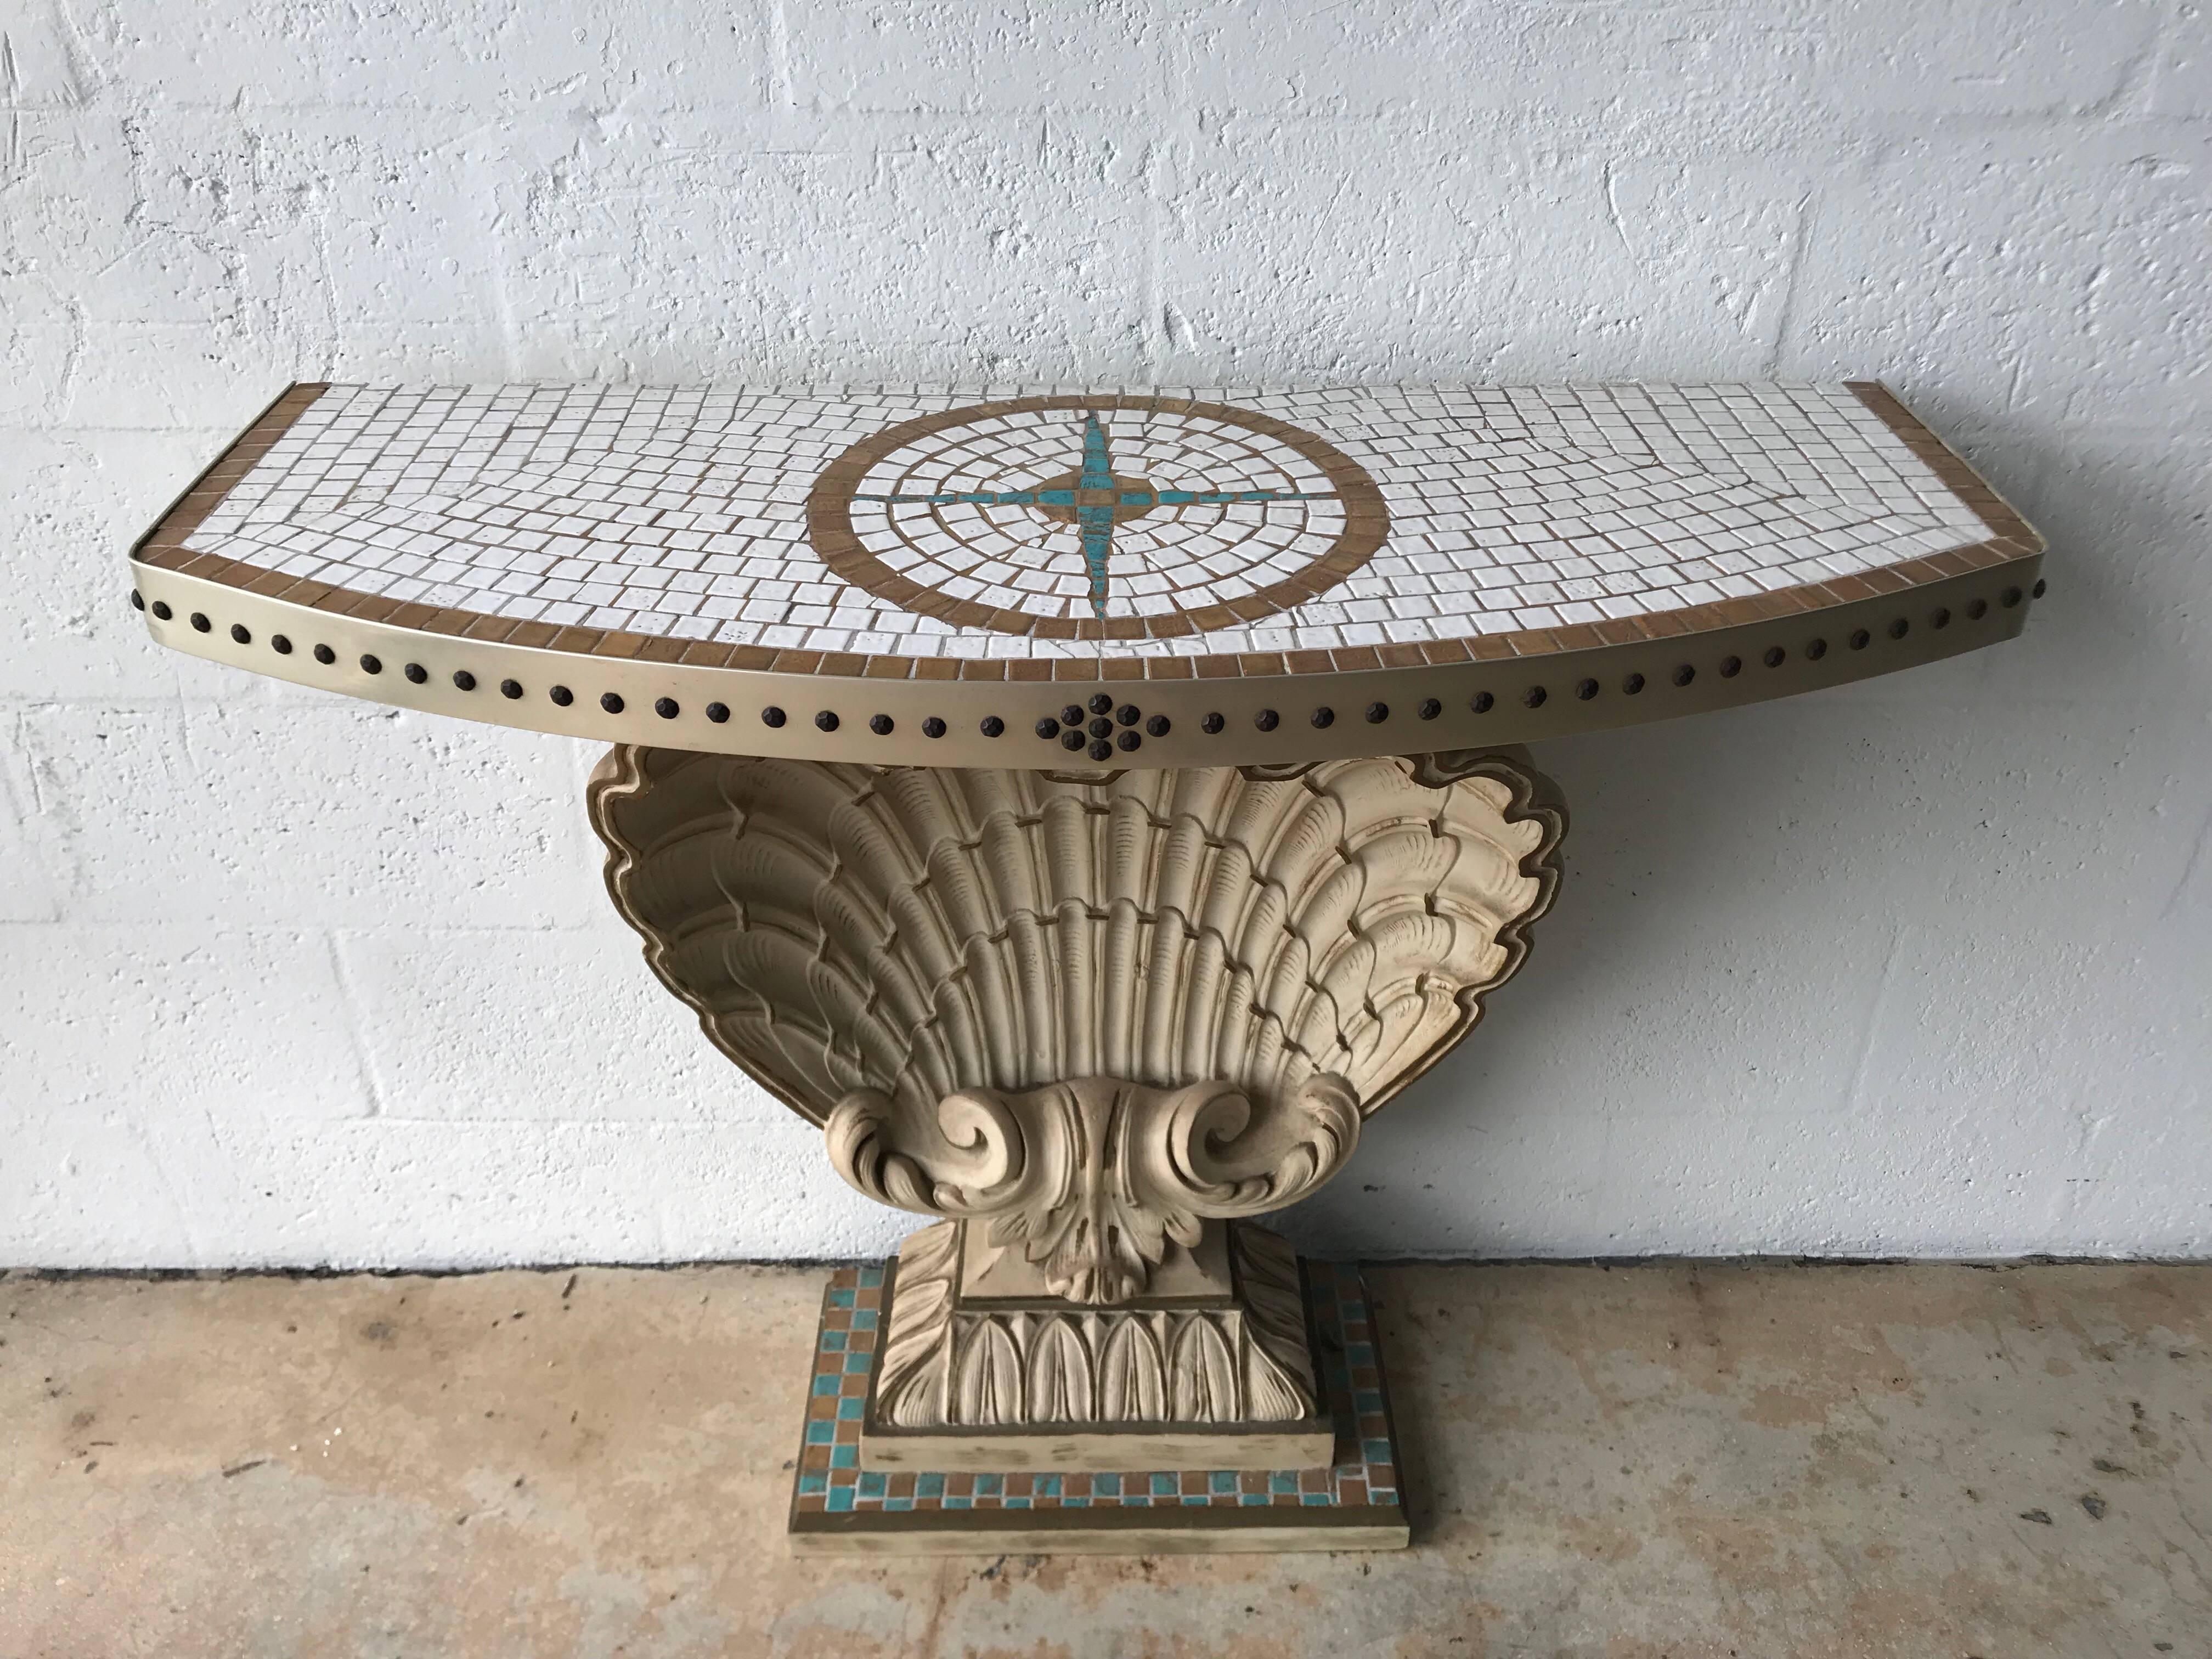 Hollywood Regency carved shell demi-lune console by Maison Jansen, with gilt carved wood, and a ceramic tiled top wrapped with a steel banding and bronze studs